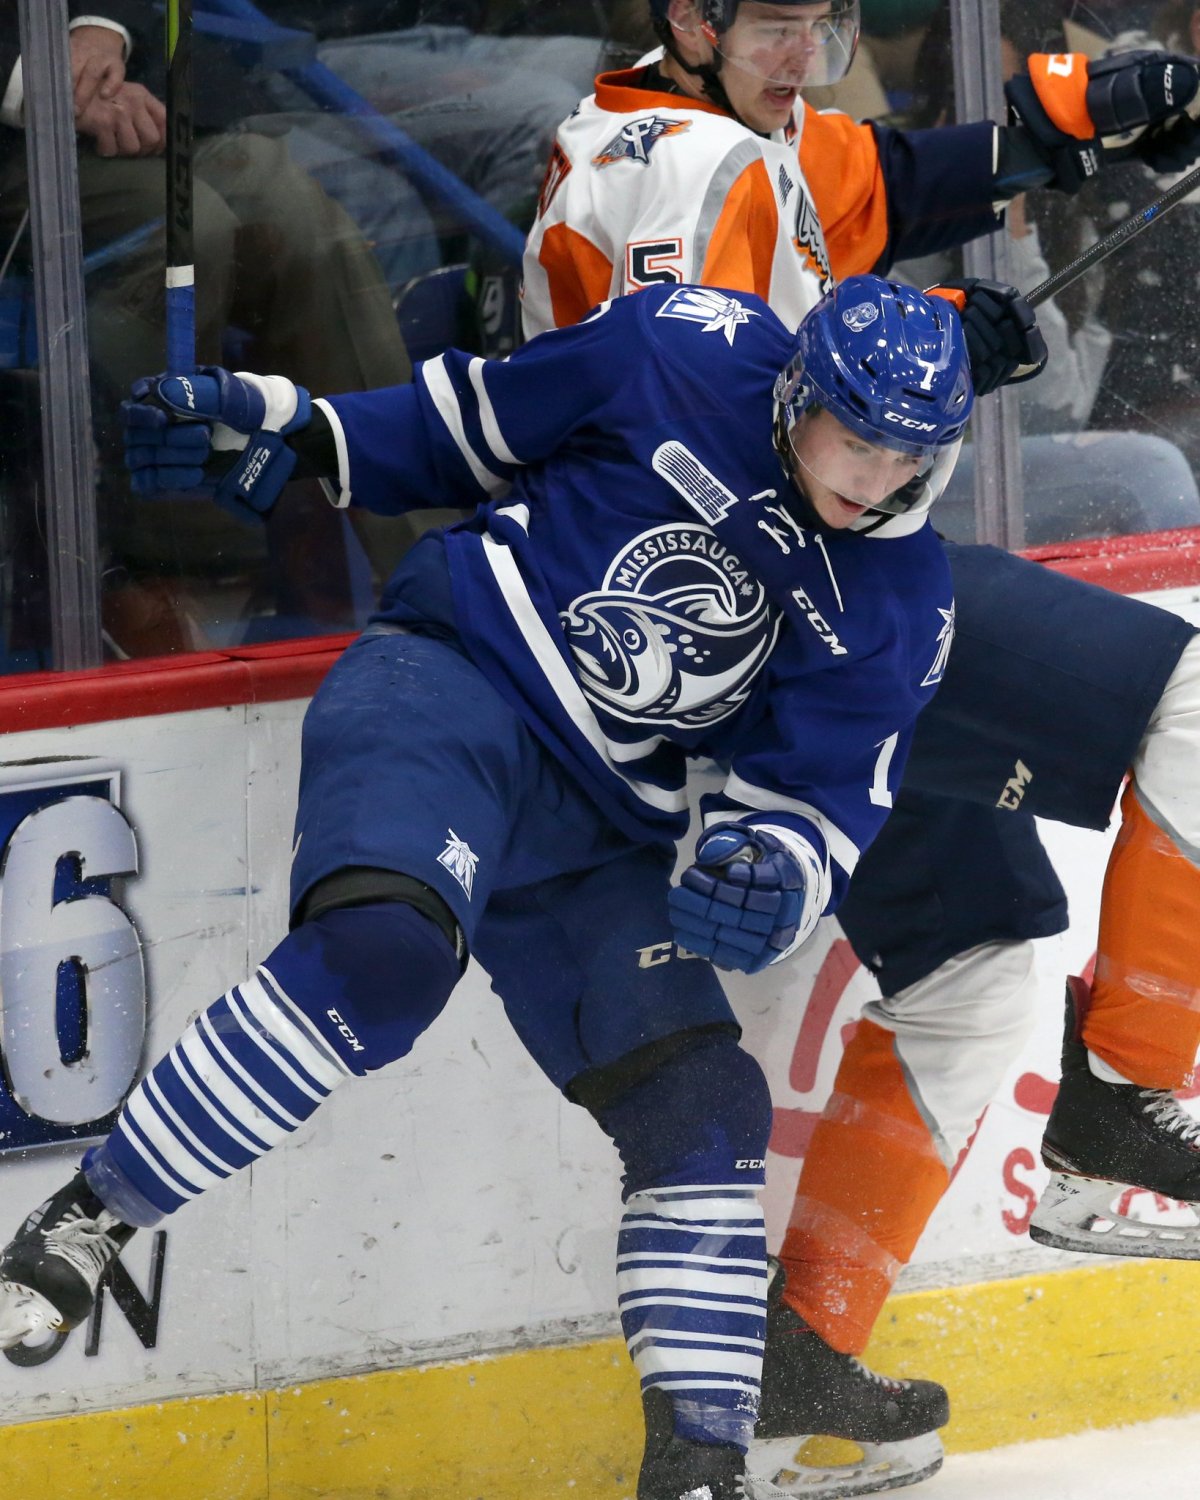 The Peterborough Petes have acquired Michael Little from the Mississauga Steelheads.